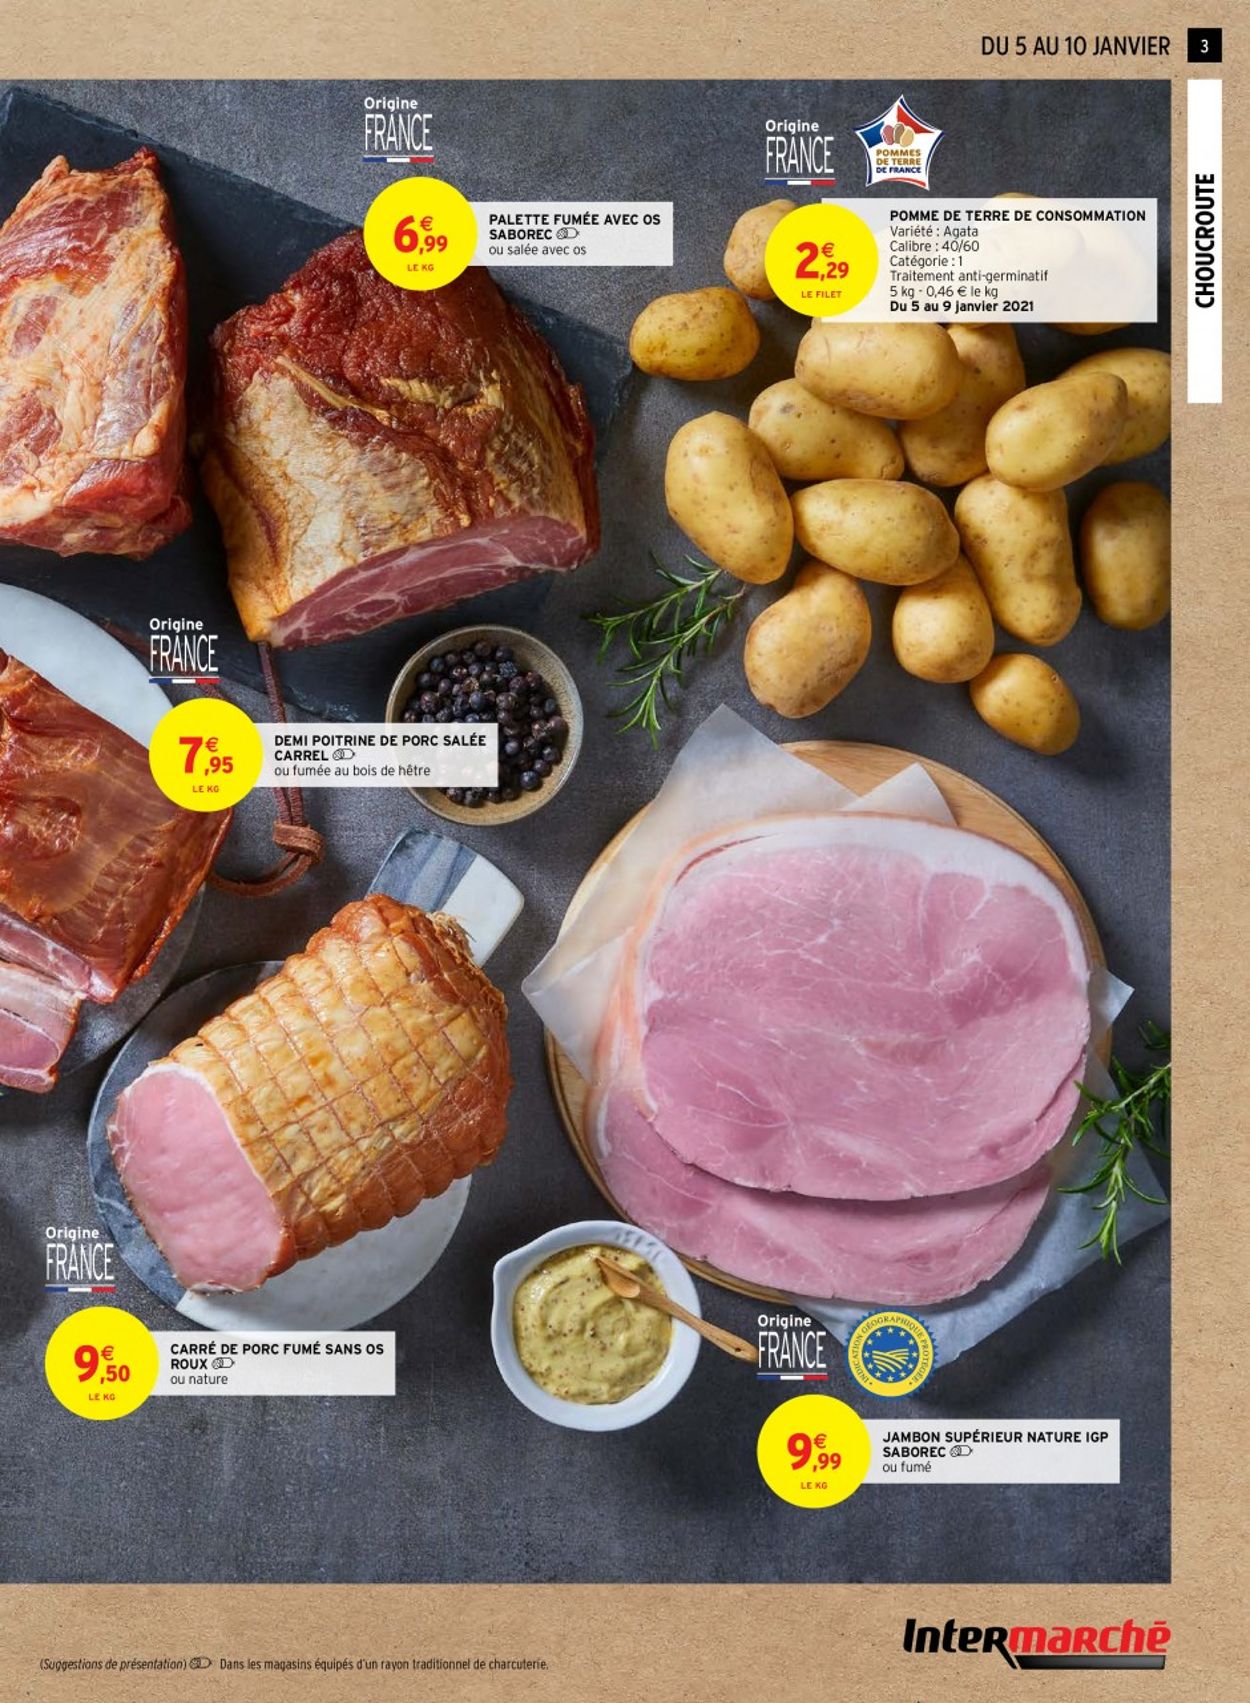 Intermarché Special Choucroute 2021 Catalogue - 05.01-10.01.2021 (Page 3)